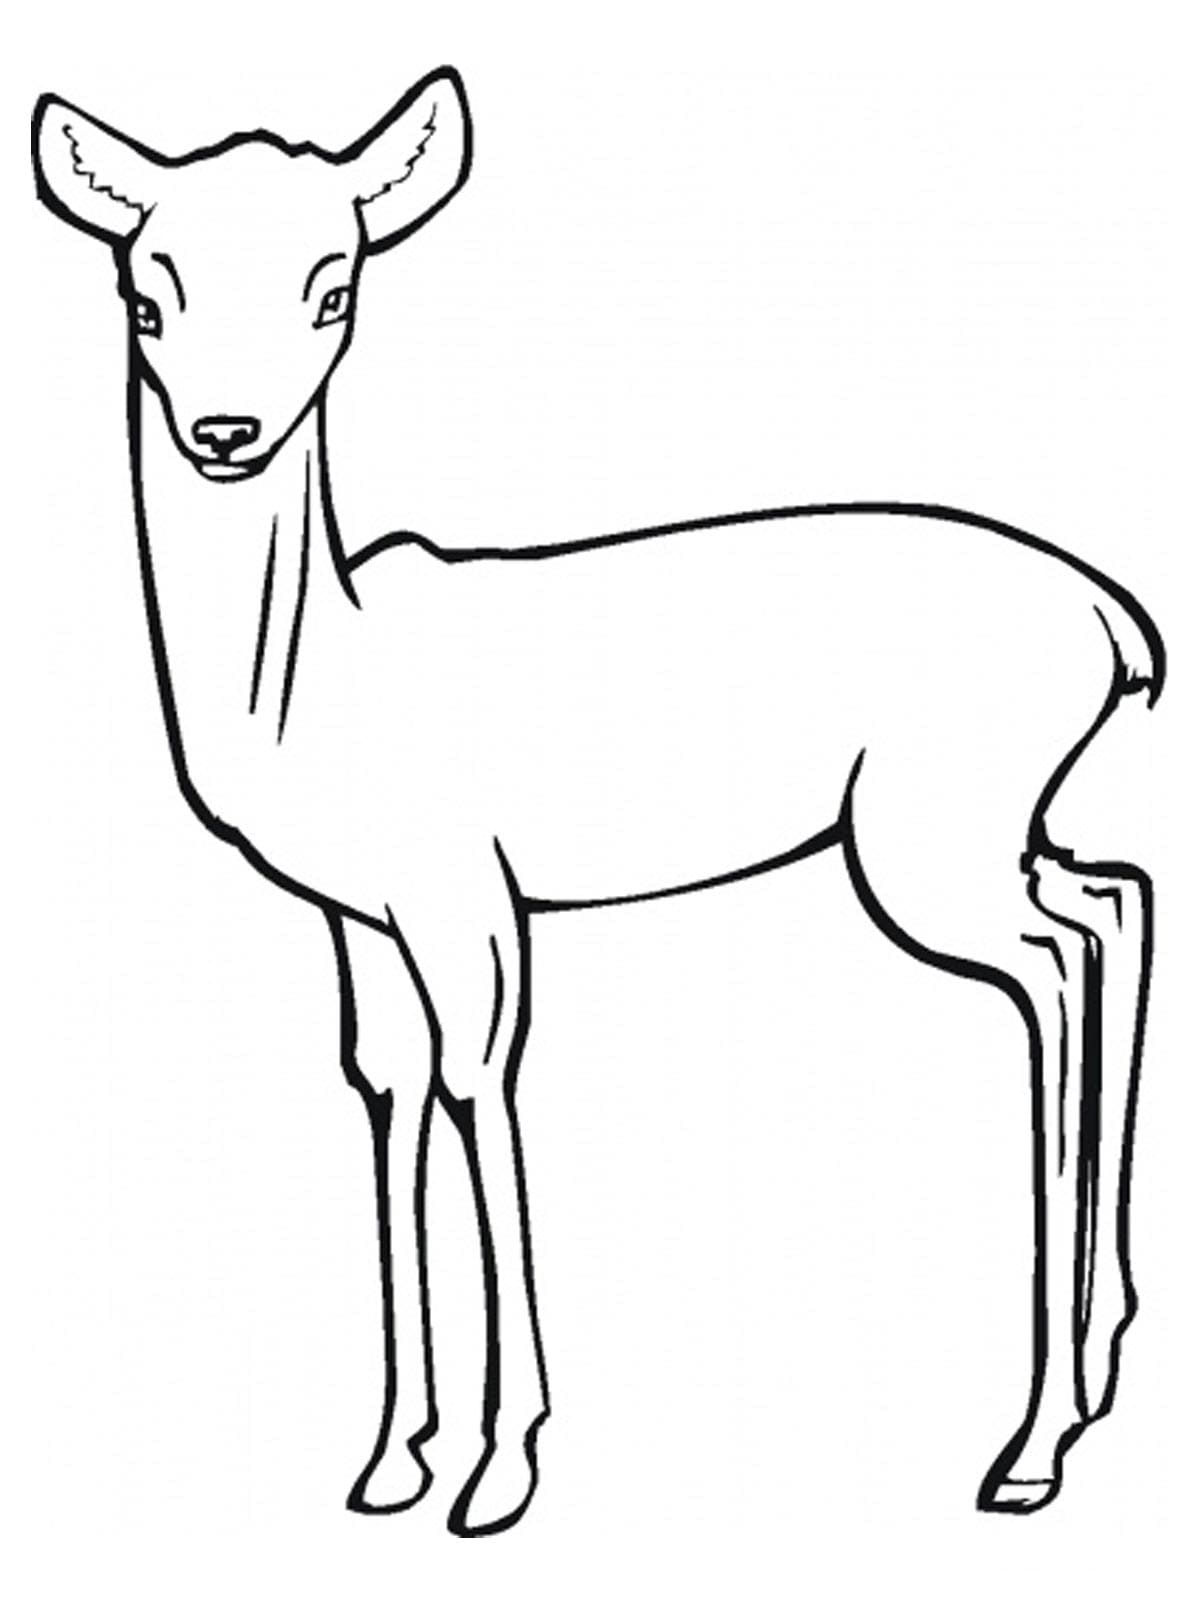 Antelope Coloring Pages for Children